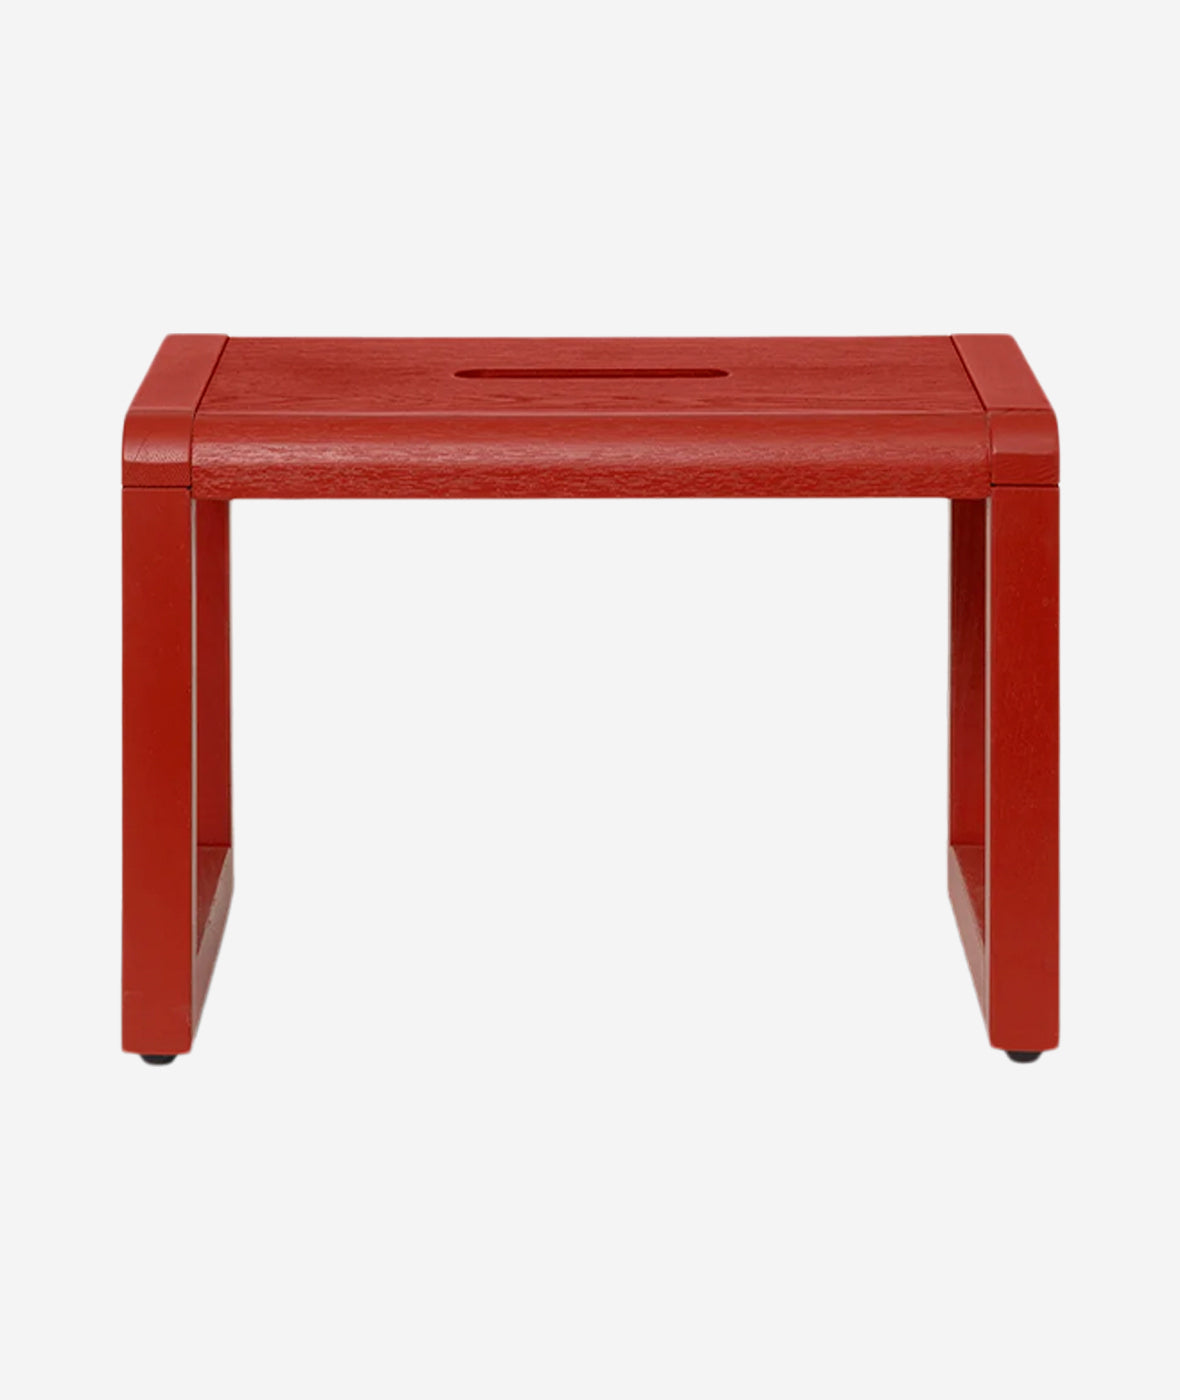 Little Architect Stool - More Options